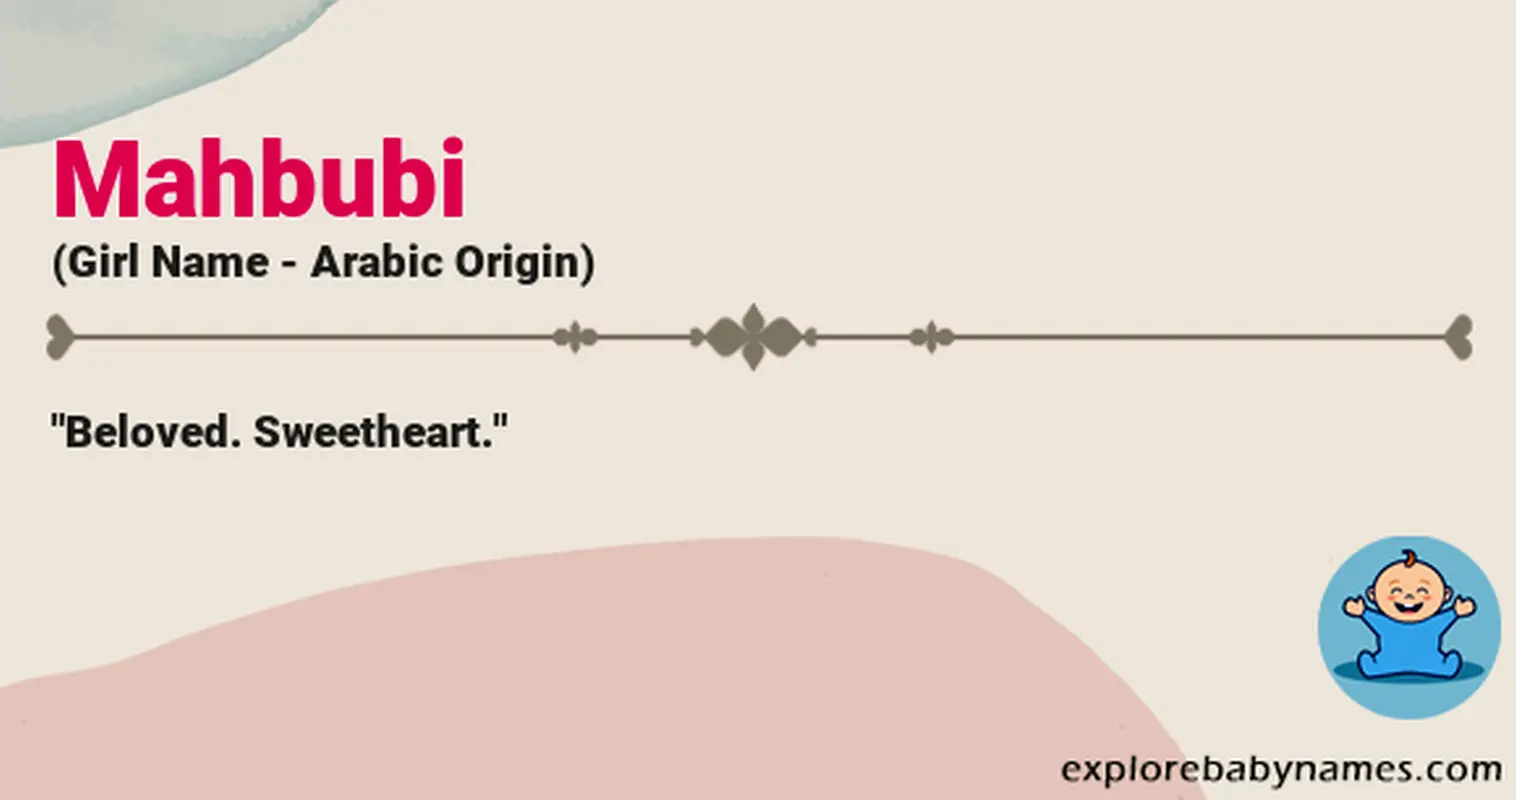 Meaning of Mahbubi